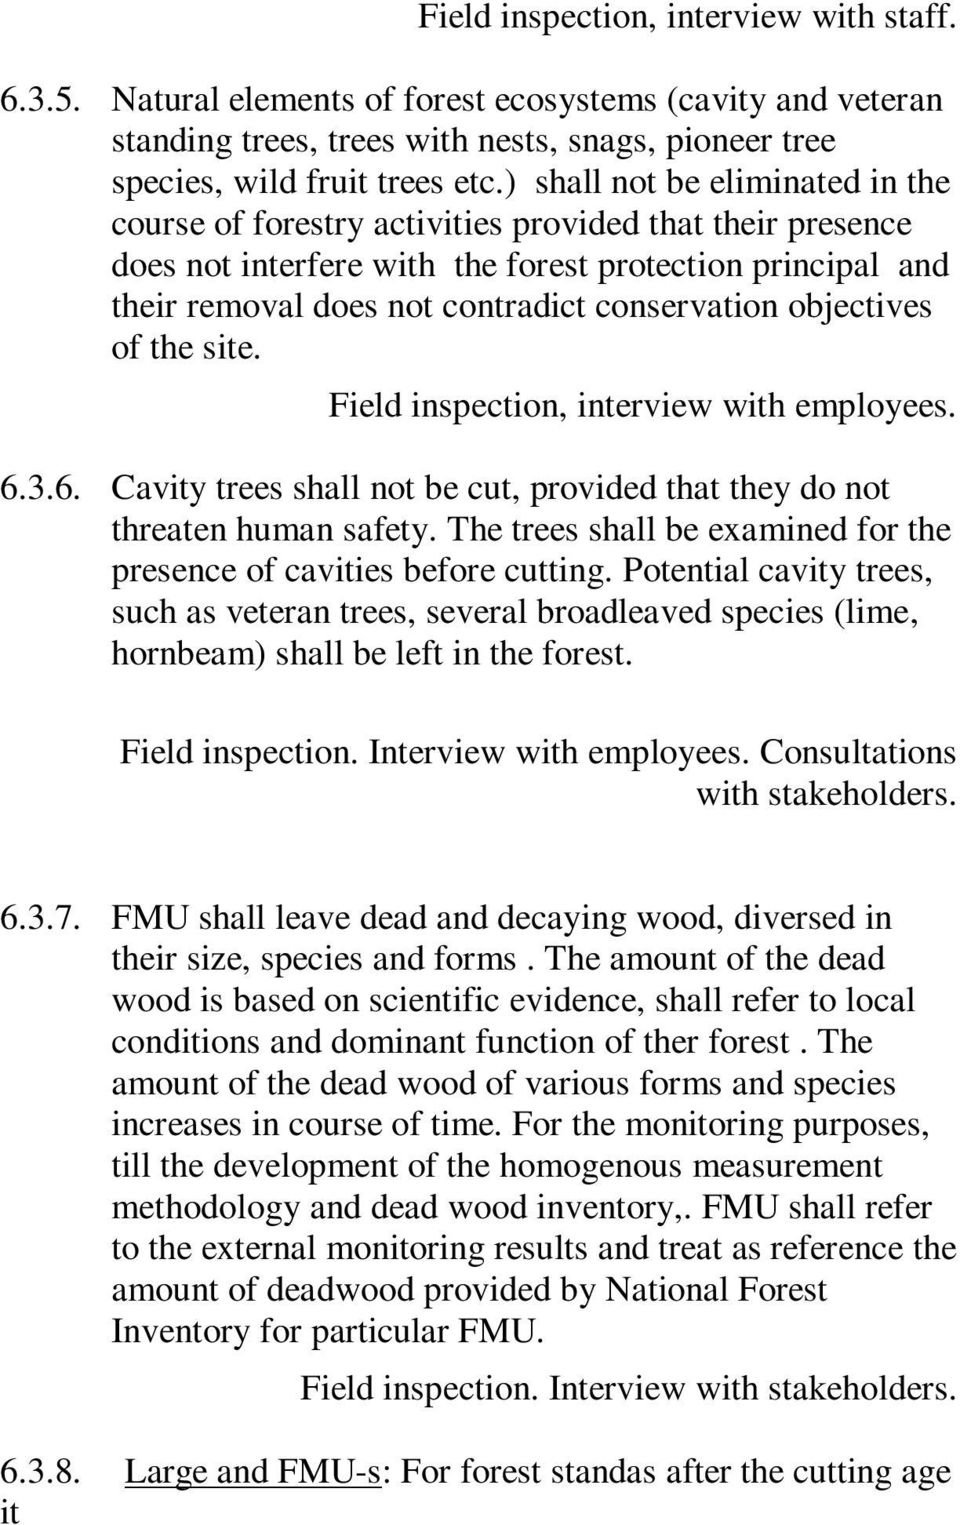 objectives of the site. Field inspection, interview with employees. 6.3.6. Cavity trees shall not be cut, provided that they do not threaten human safety.